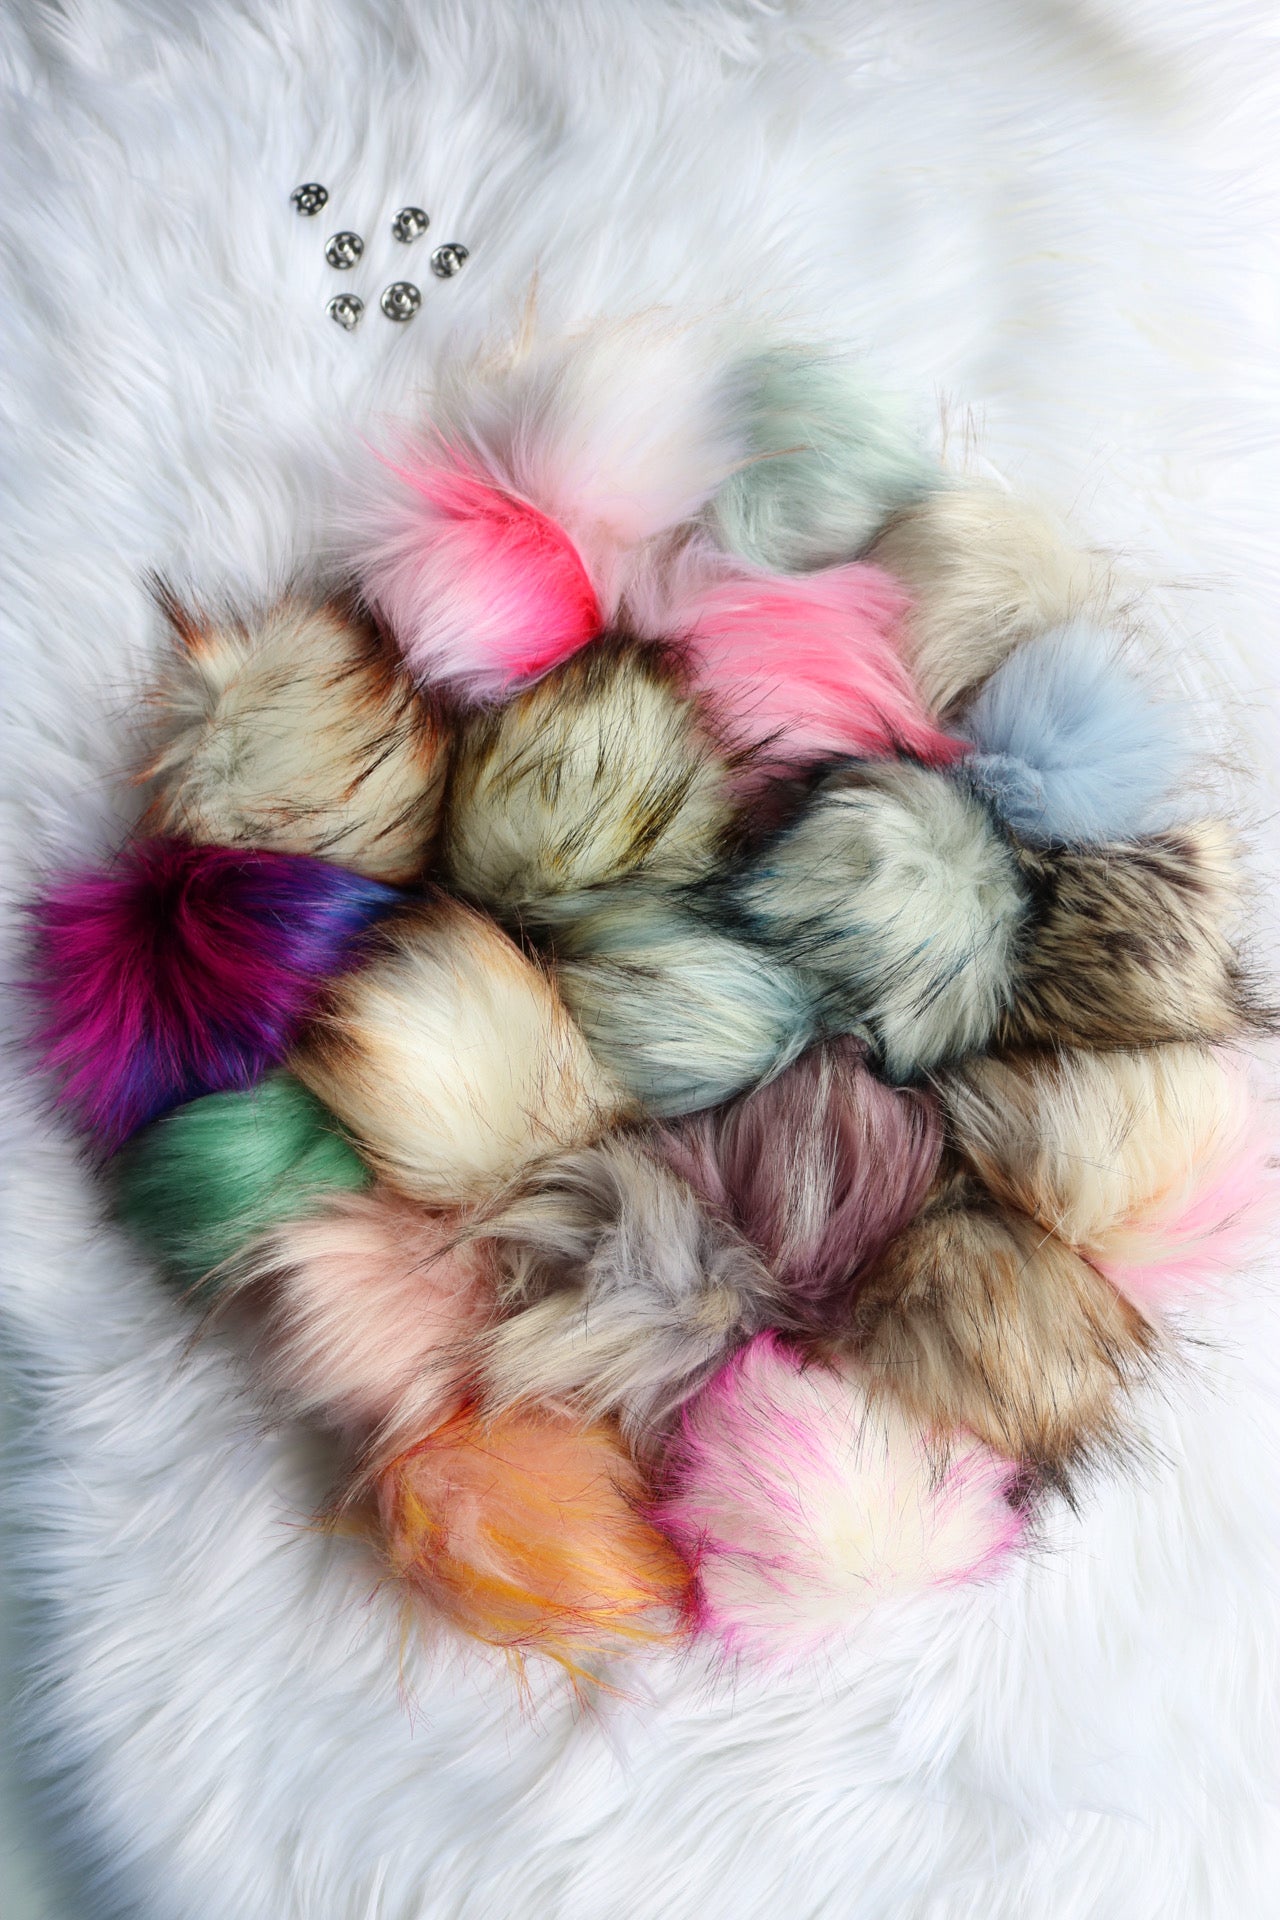 Extra Large Faux Fur Pom Poms with Snap